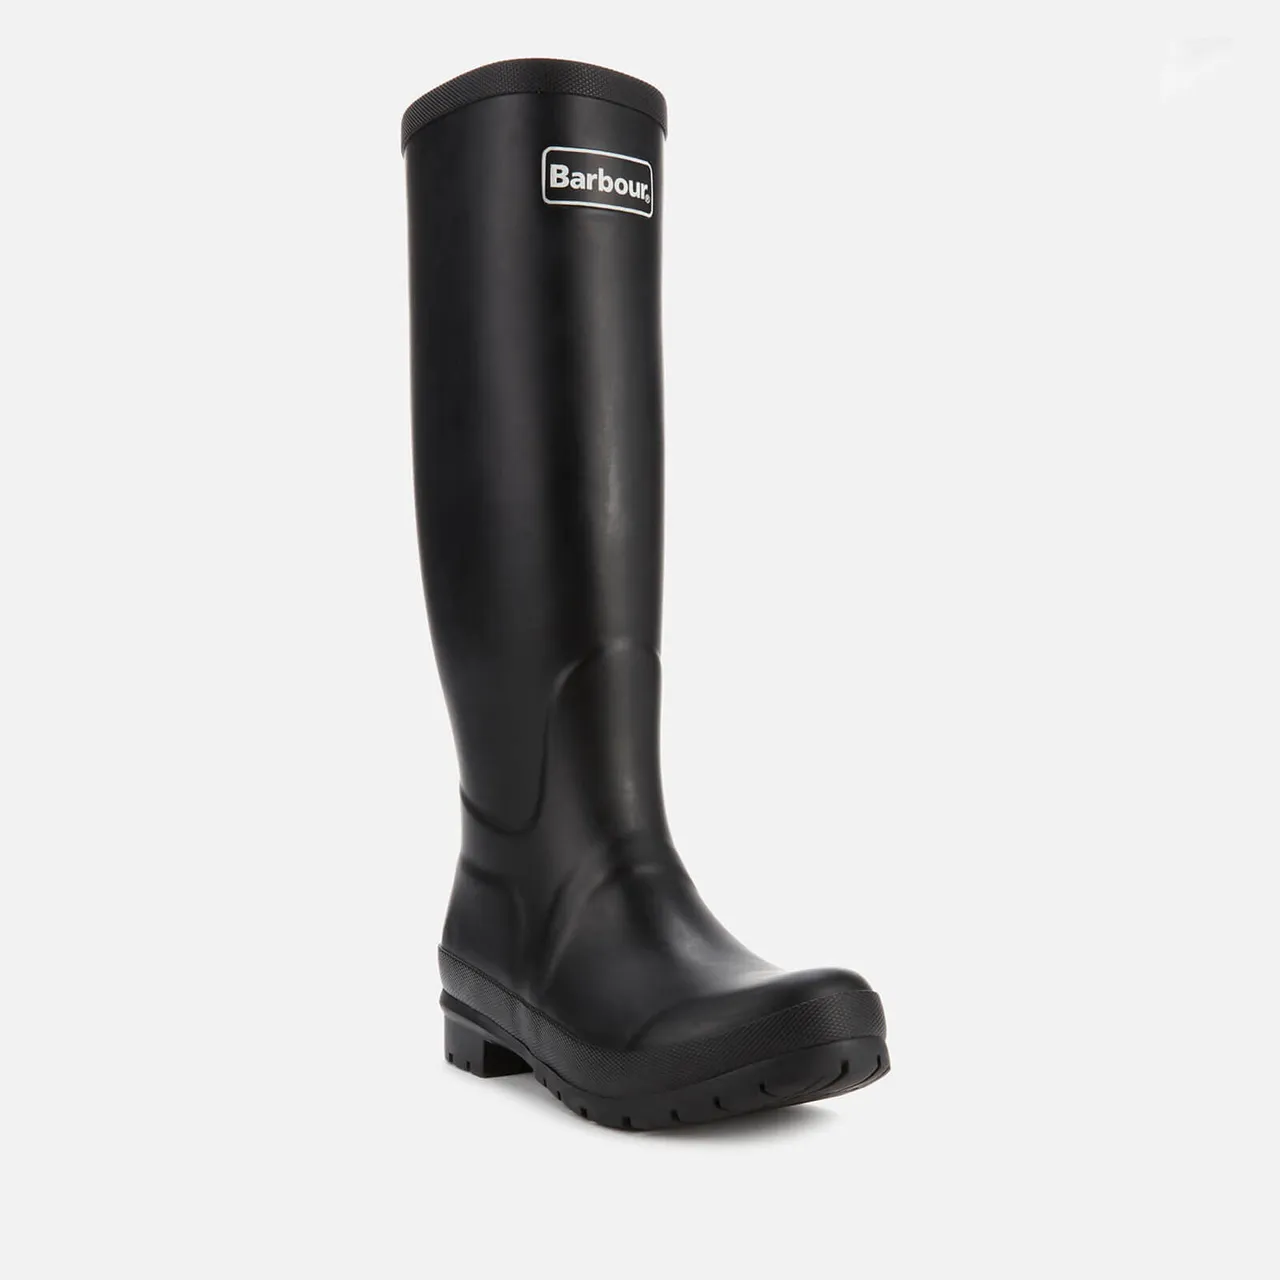 Barbour Women's Abbey Tall Wellies - Black - UK